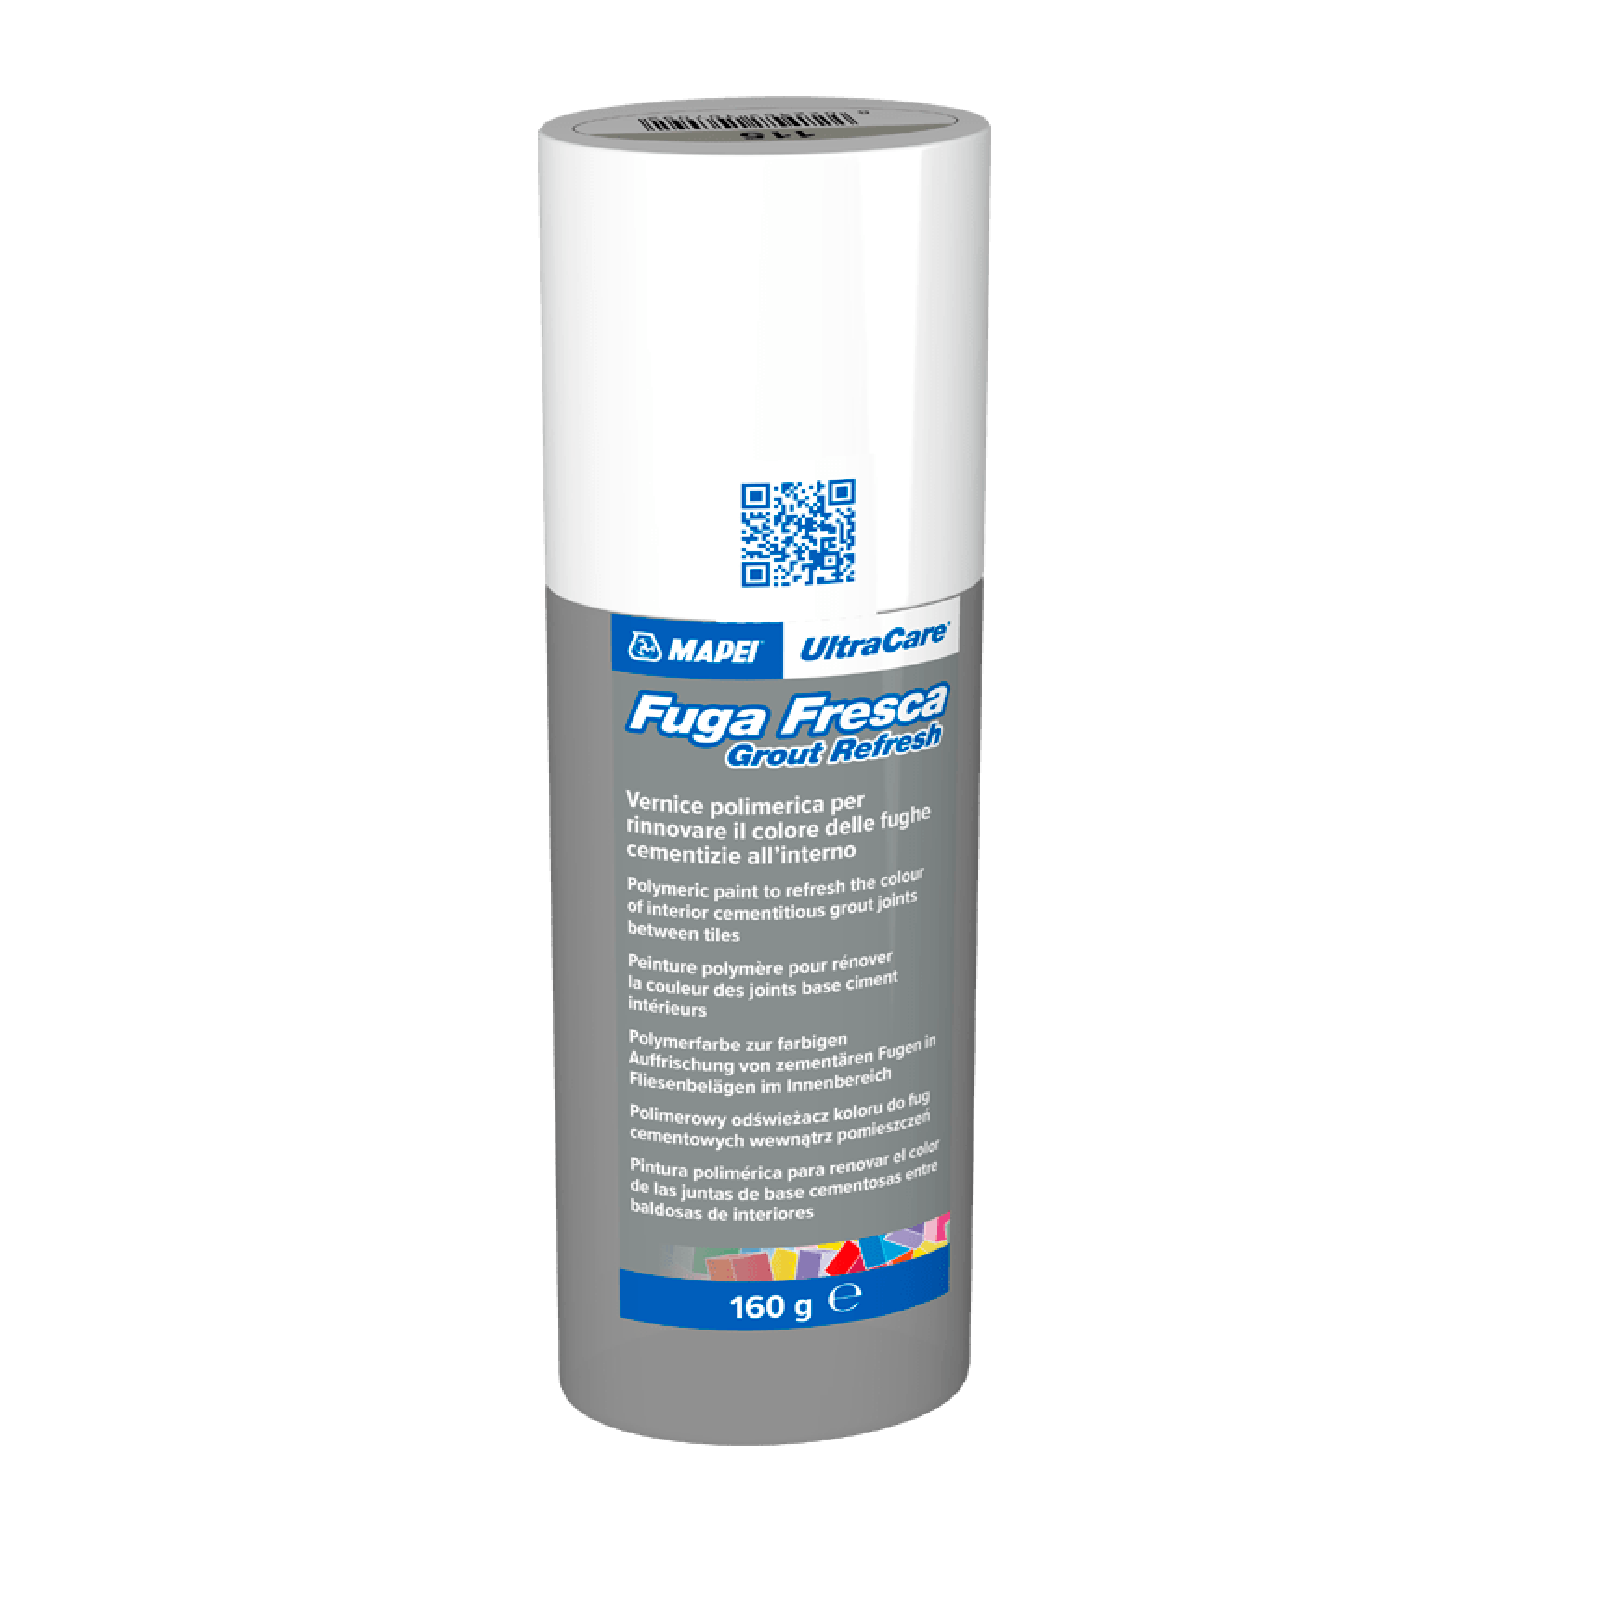 MAPEI FUGA FRESCA Polymeric Paint For Tiles Grout Joints